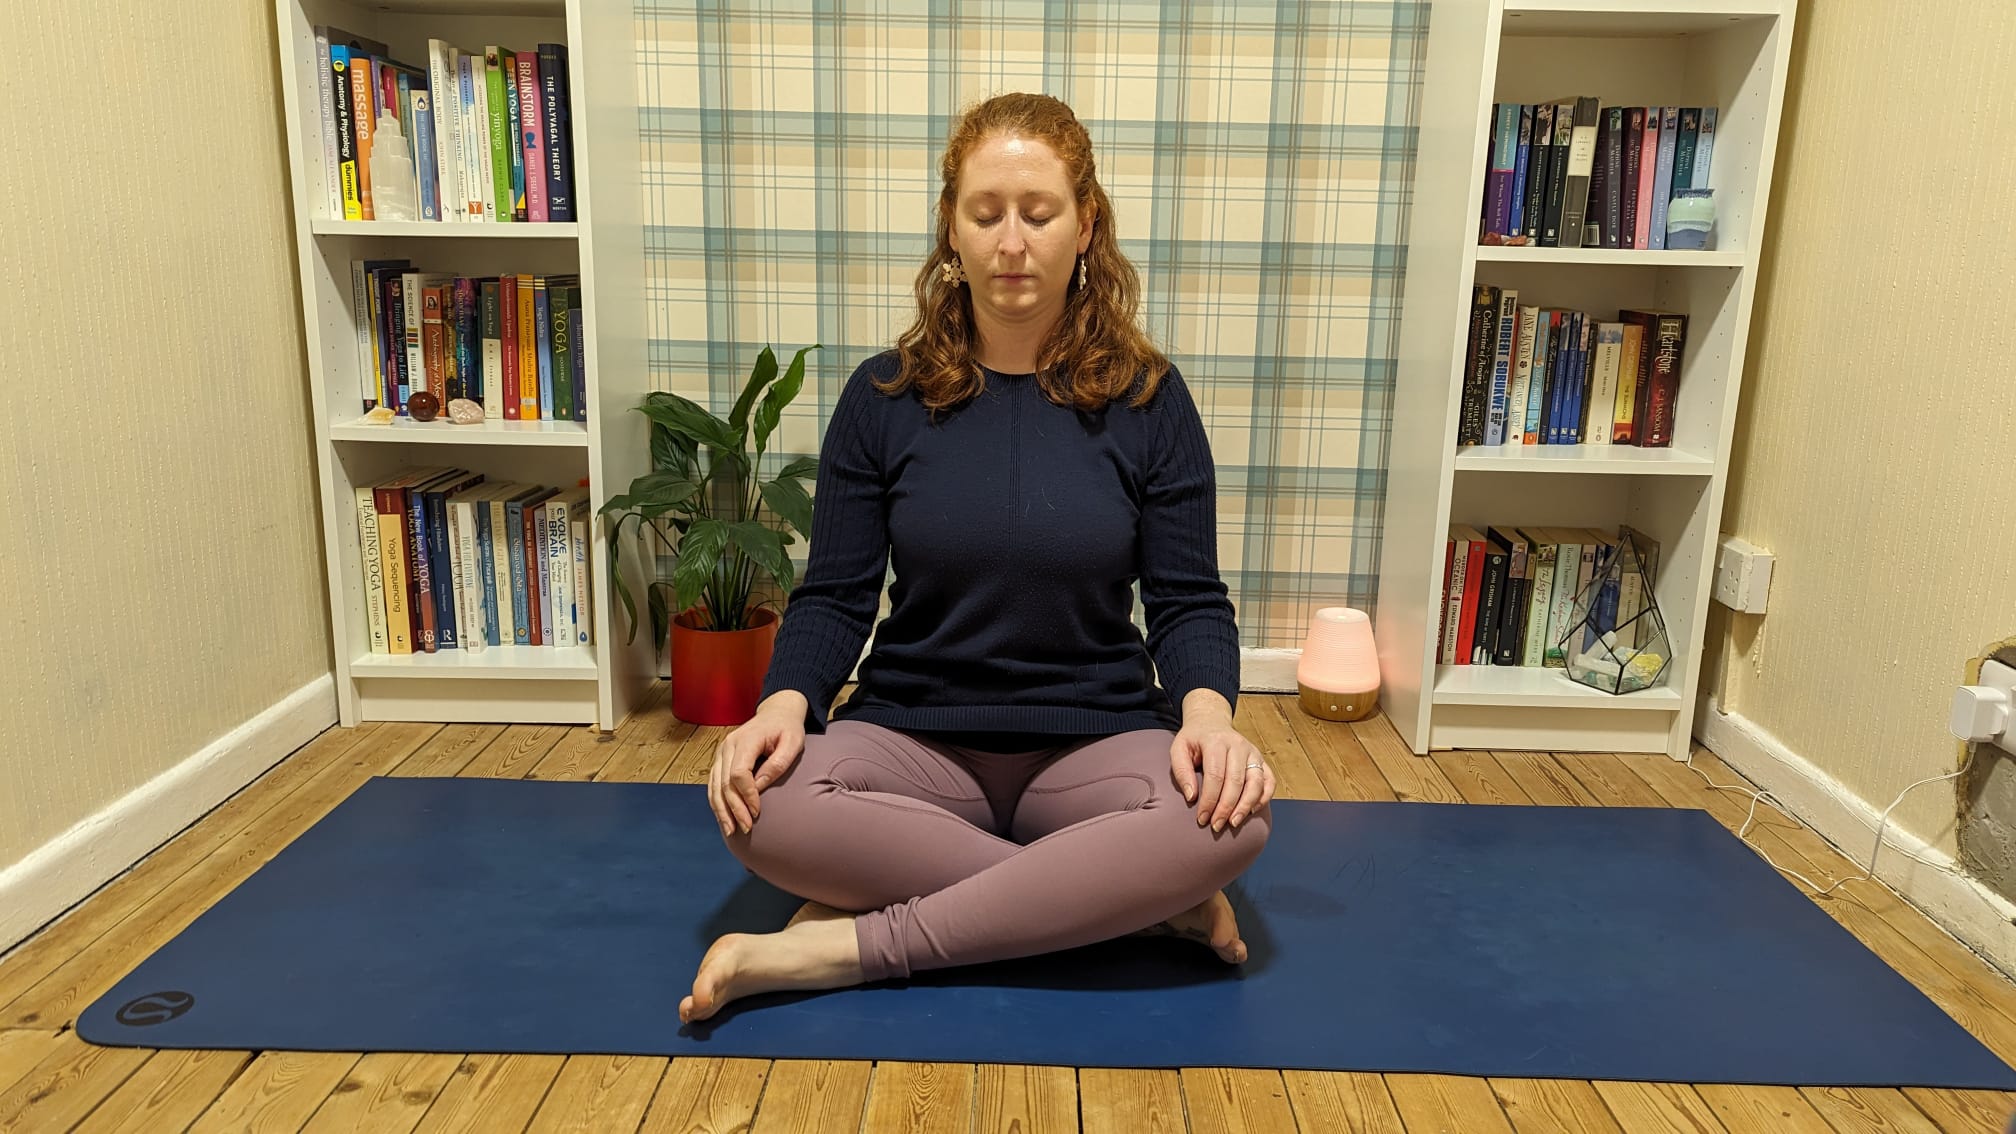 Yoga Trainer At Home For Cervical | Personal Yoga Trainer Classes At Home |  Yoga Trainer At Home | Yoga At Home For Yoga For Cervical | Yoga Classes At  Home For